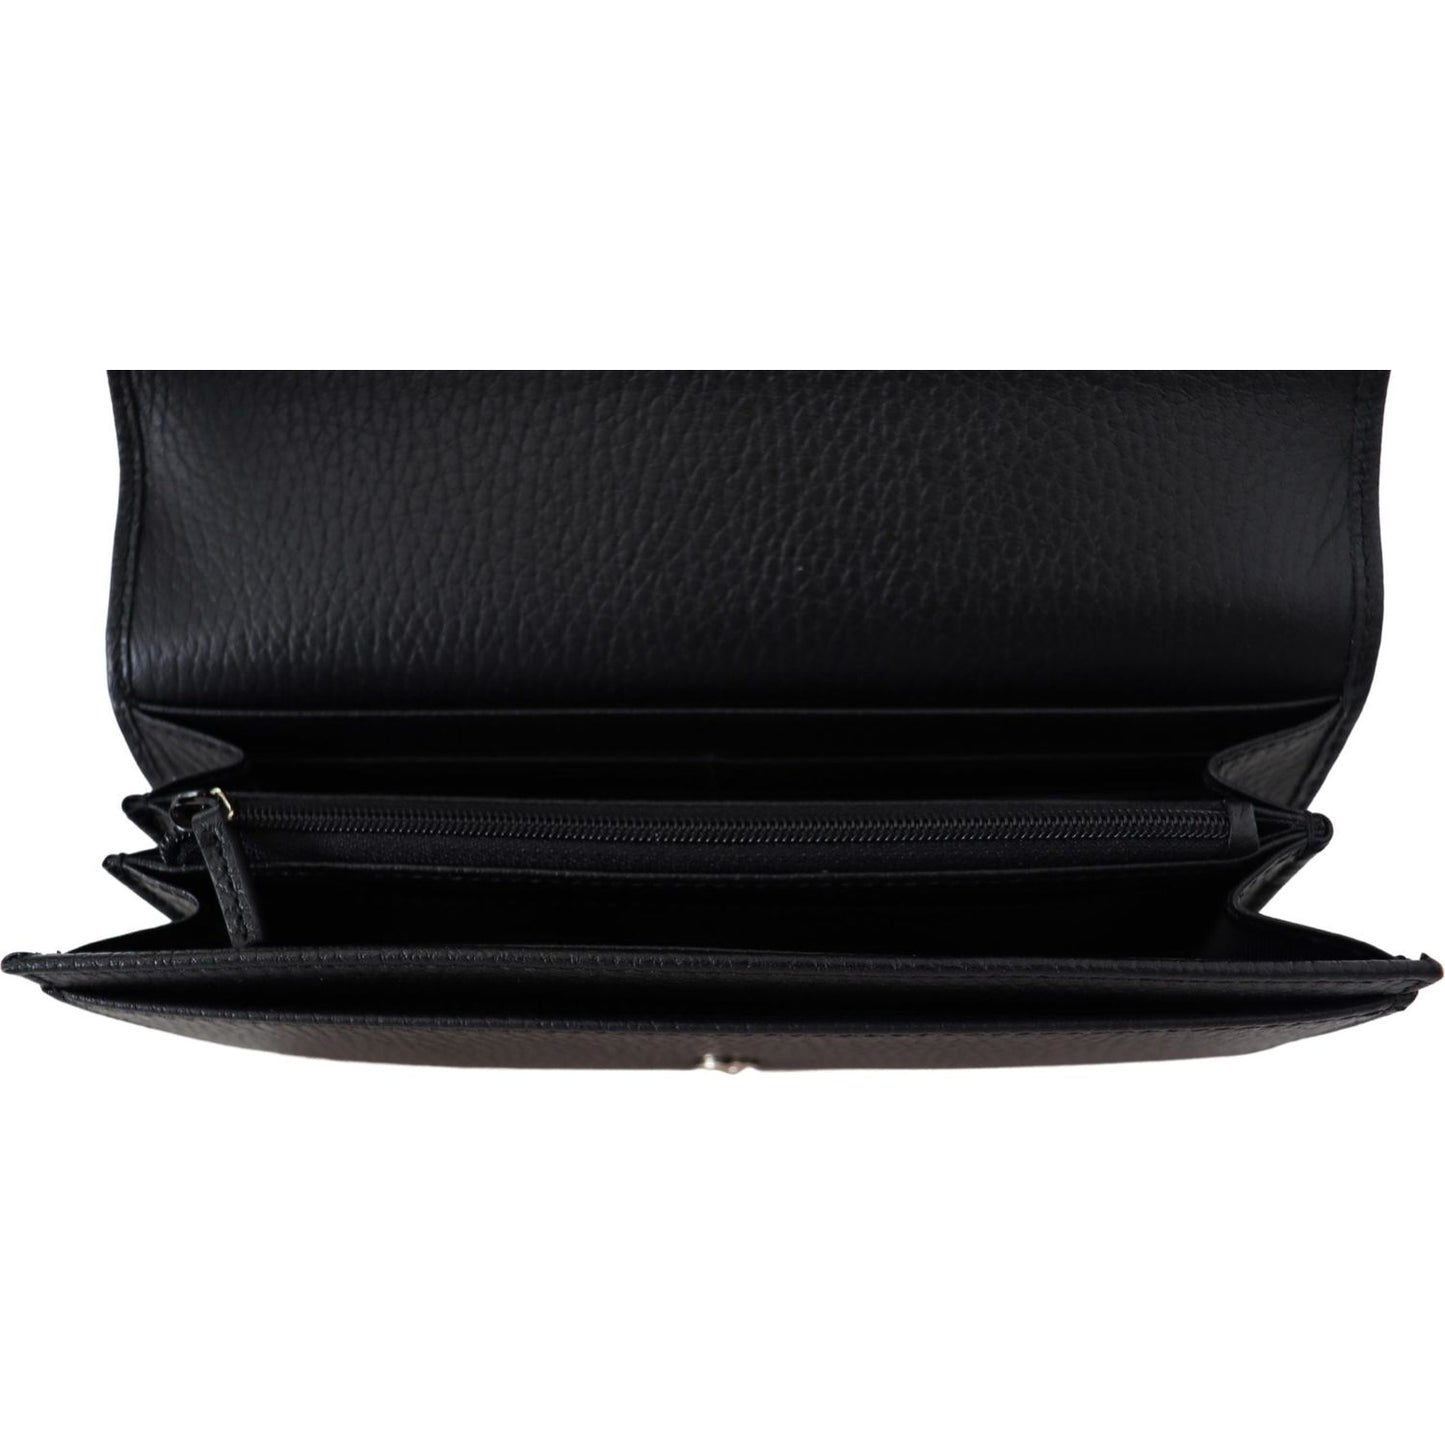 Gucci Elegant Black Leather Wallet with GG Snap Closure black-icon-leather-wallet